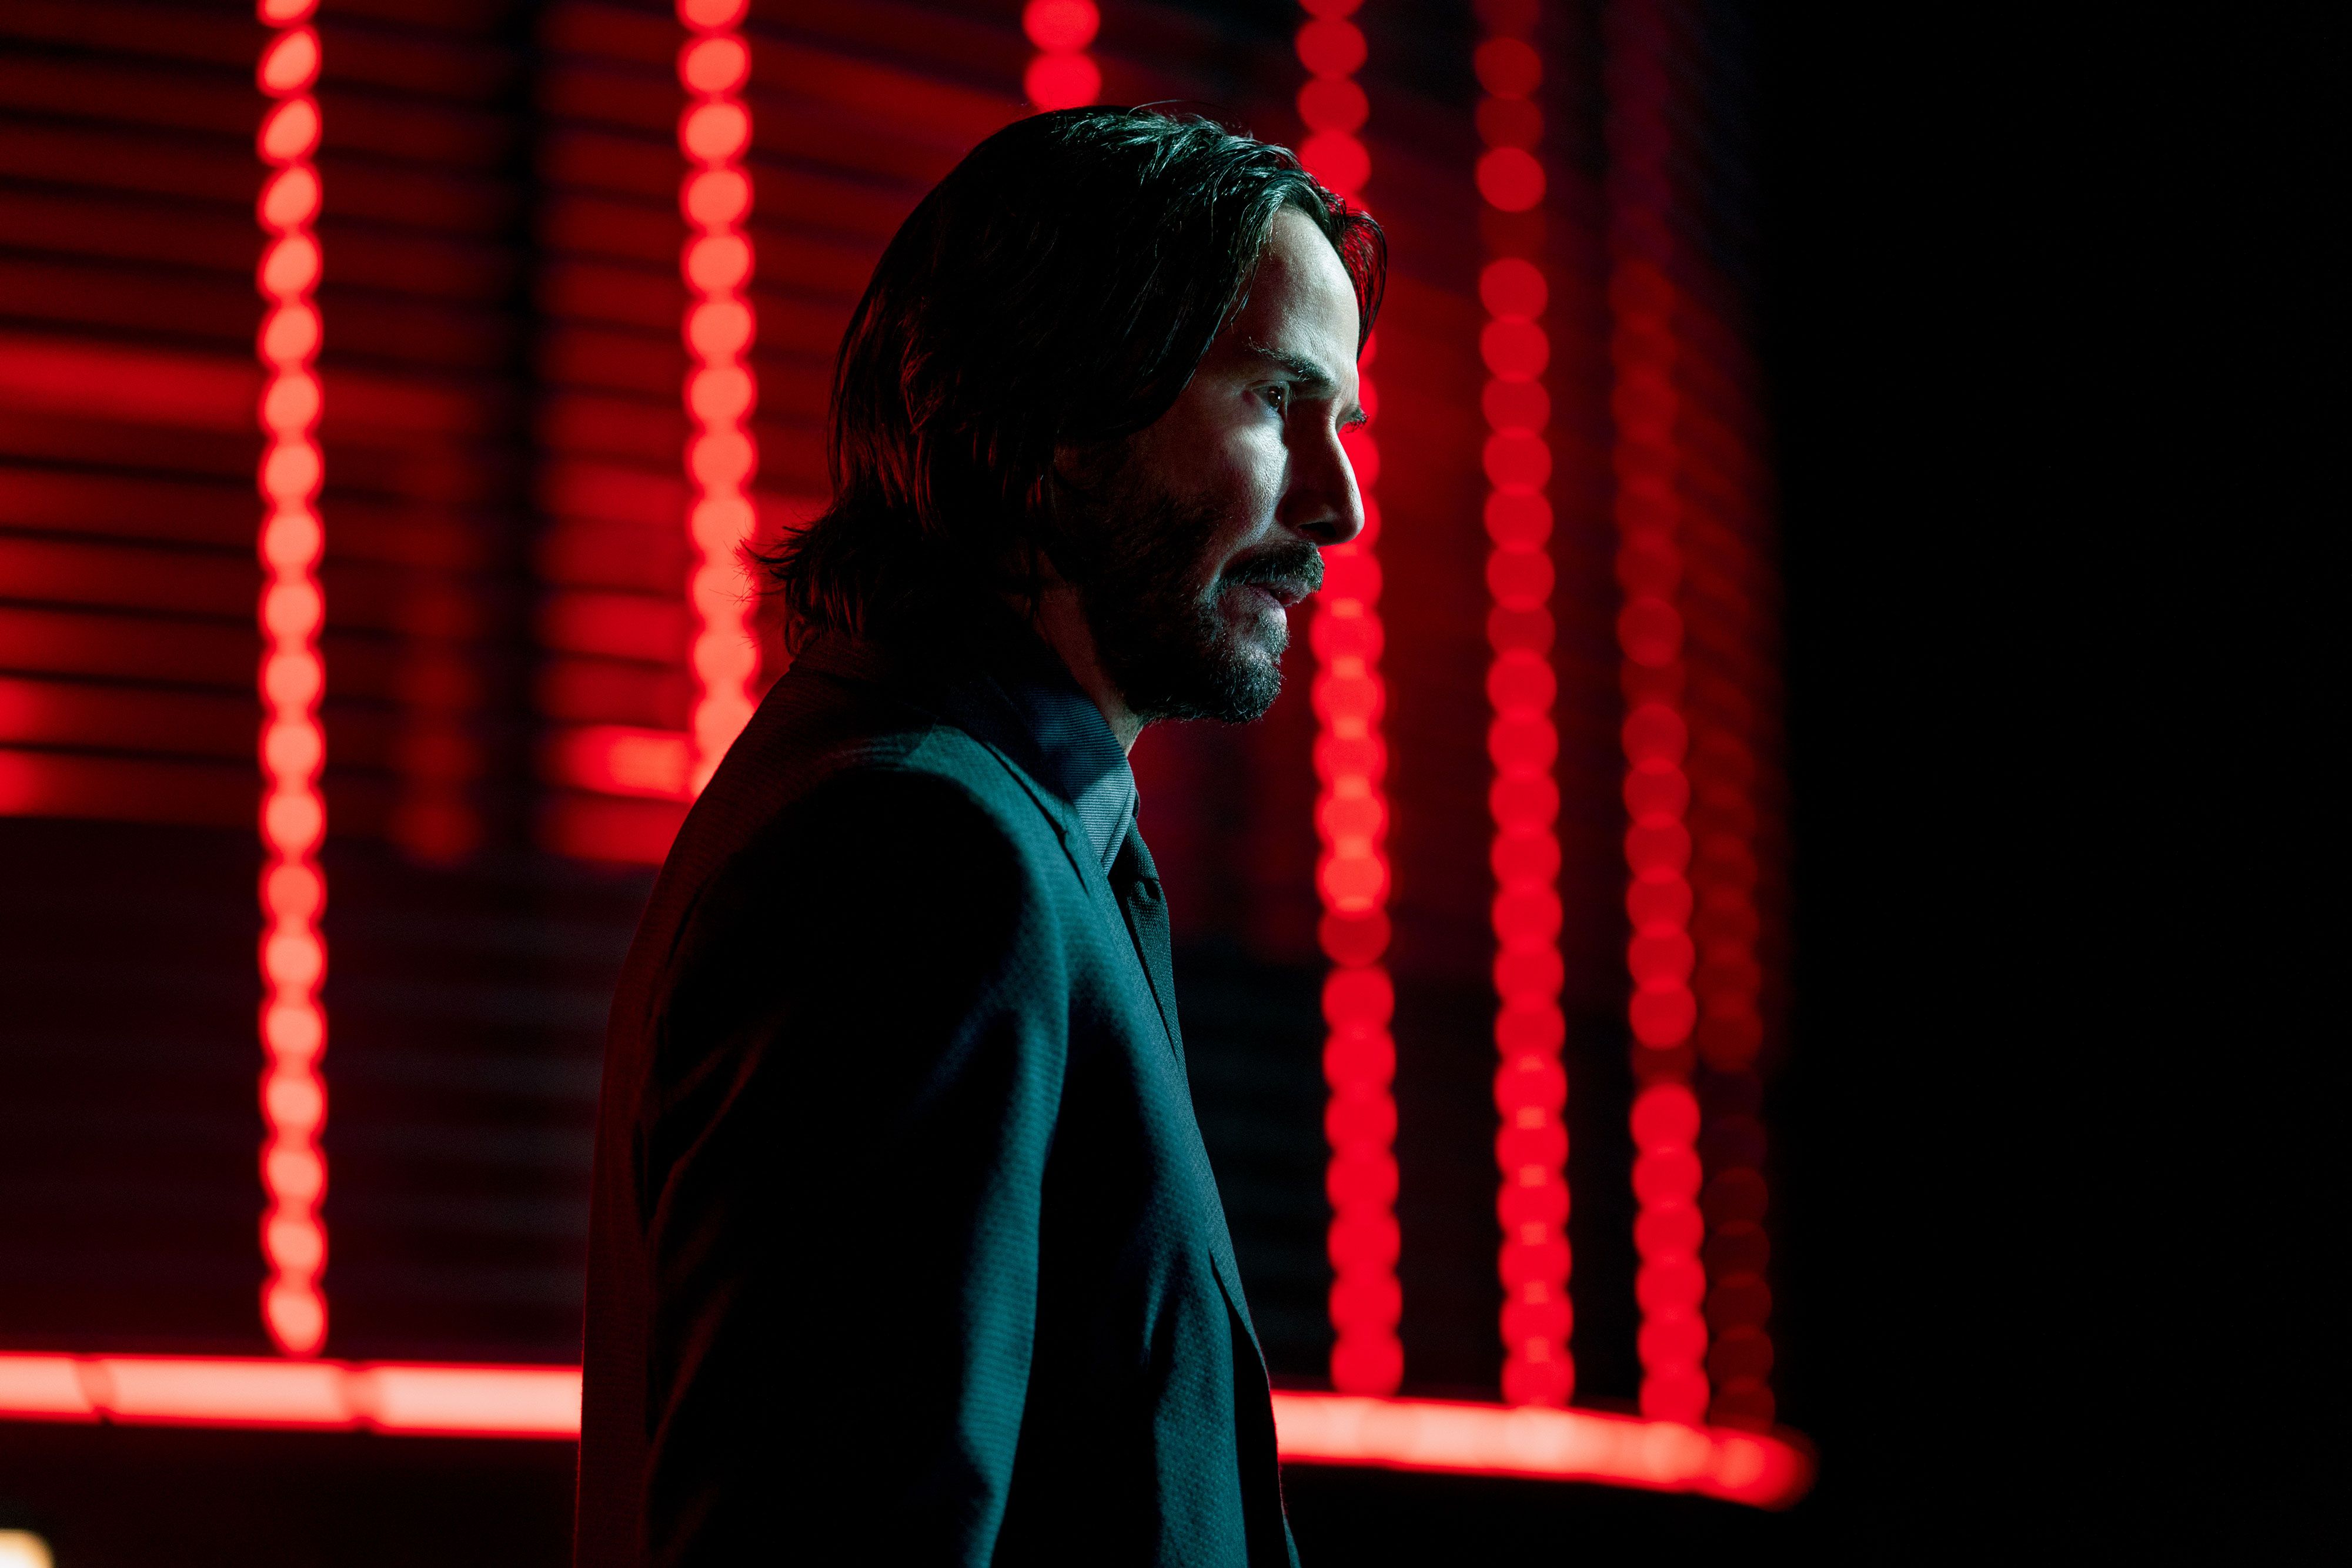 John Wick: Chapter 4' off to strong start at international box